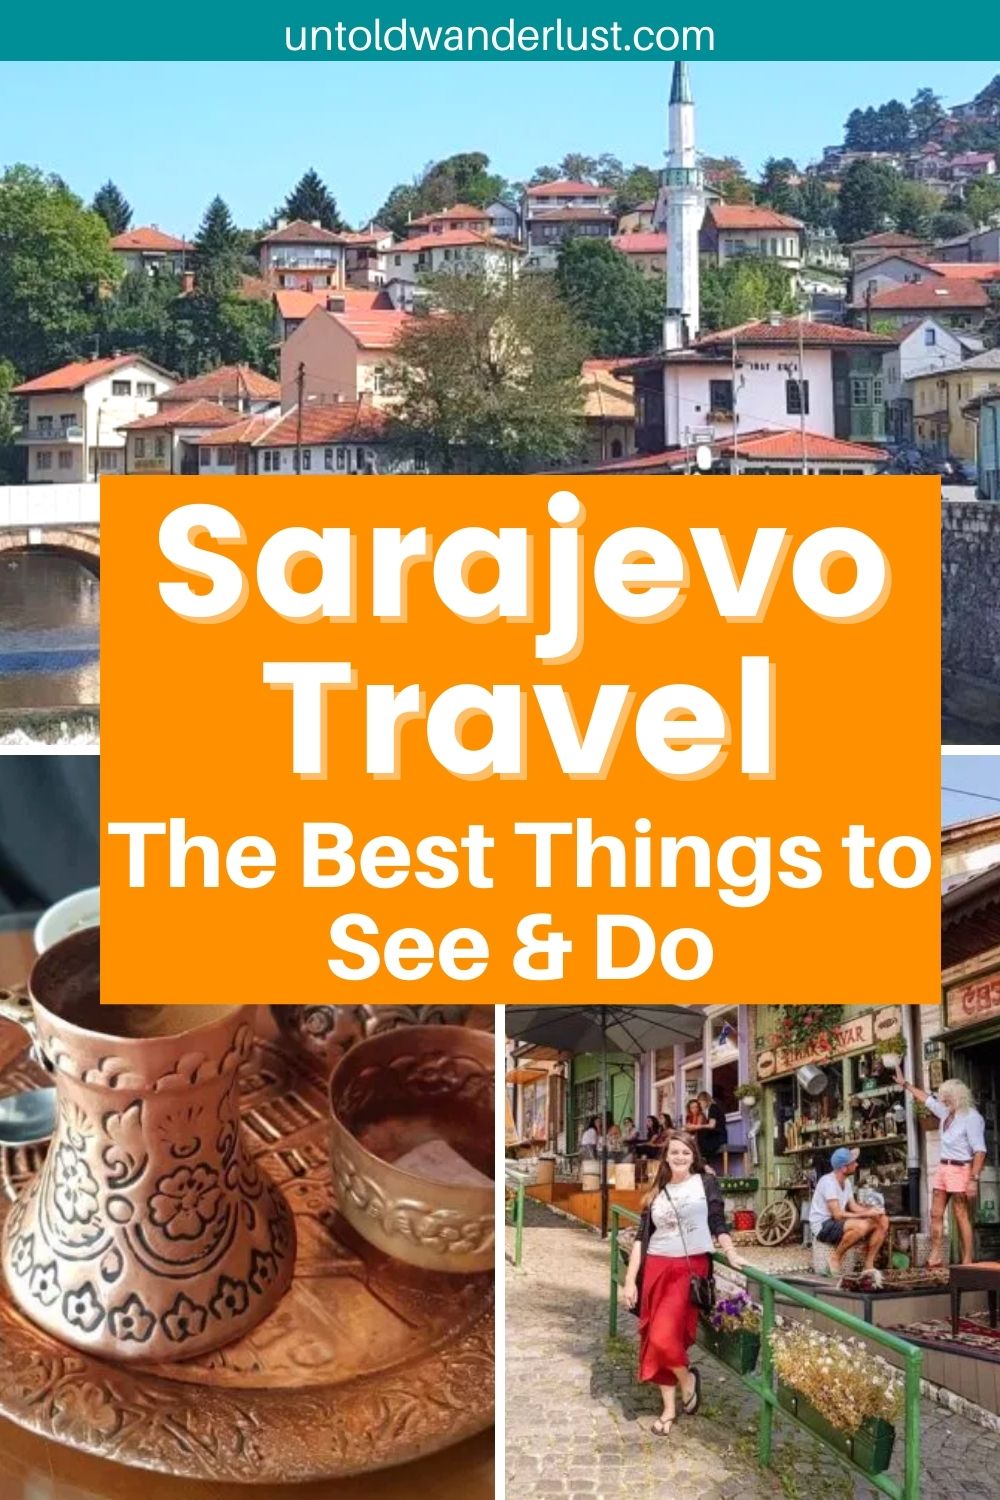 Sarajevo Travel | The Best Things to do